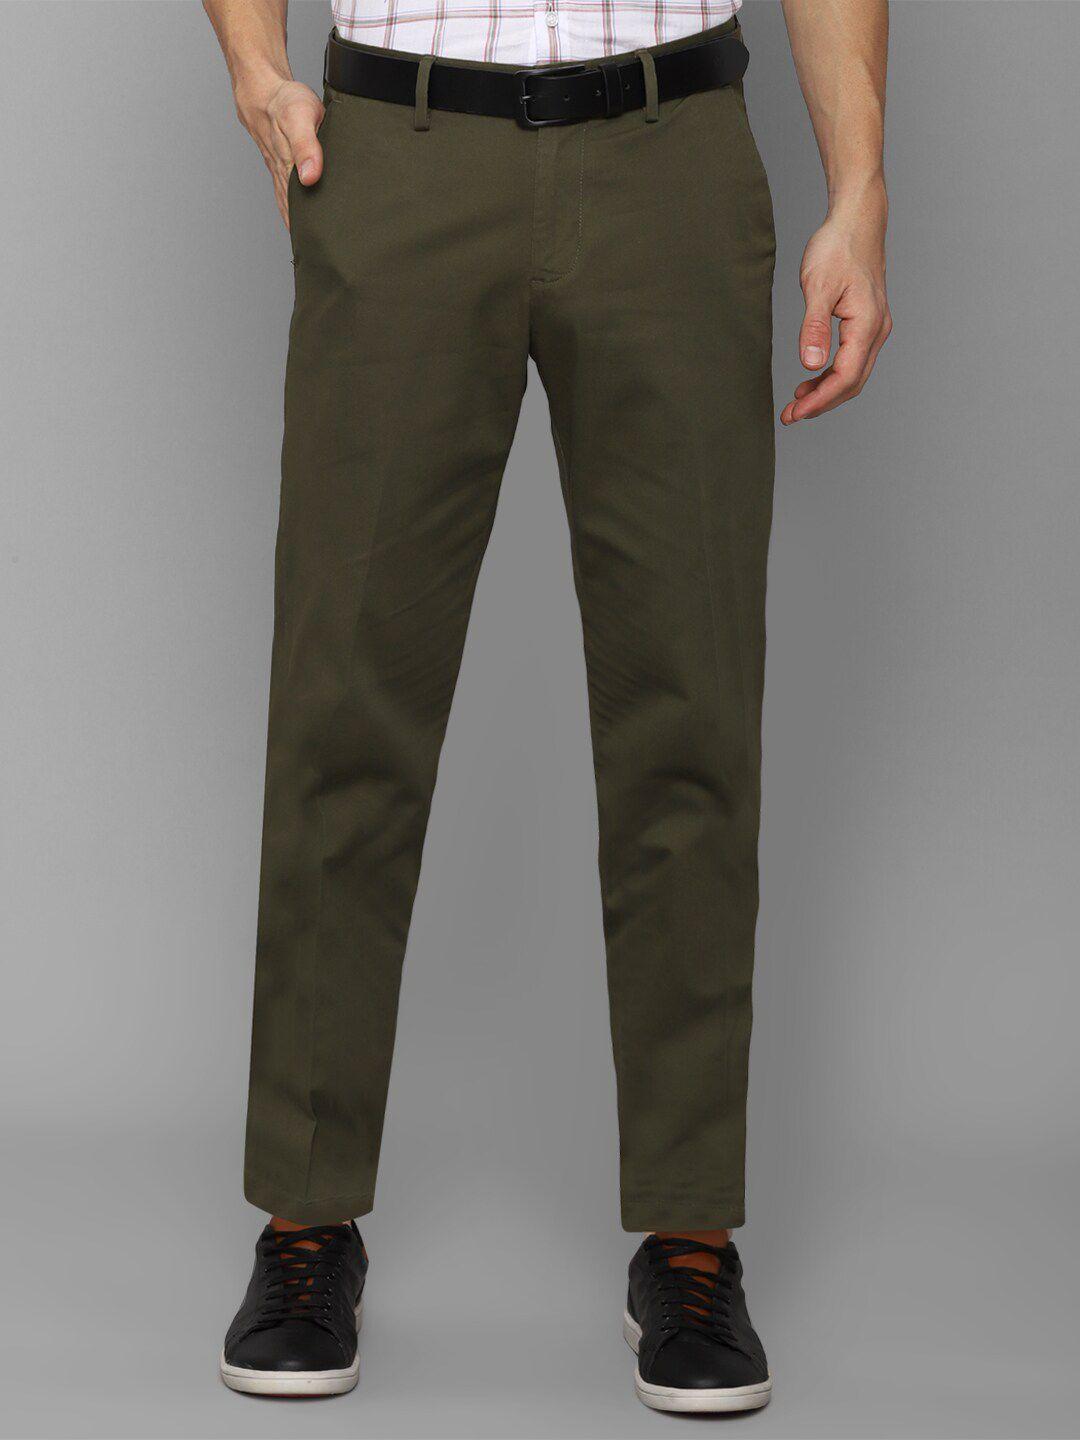 allen solly men olive green slim fit casual trousers